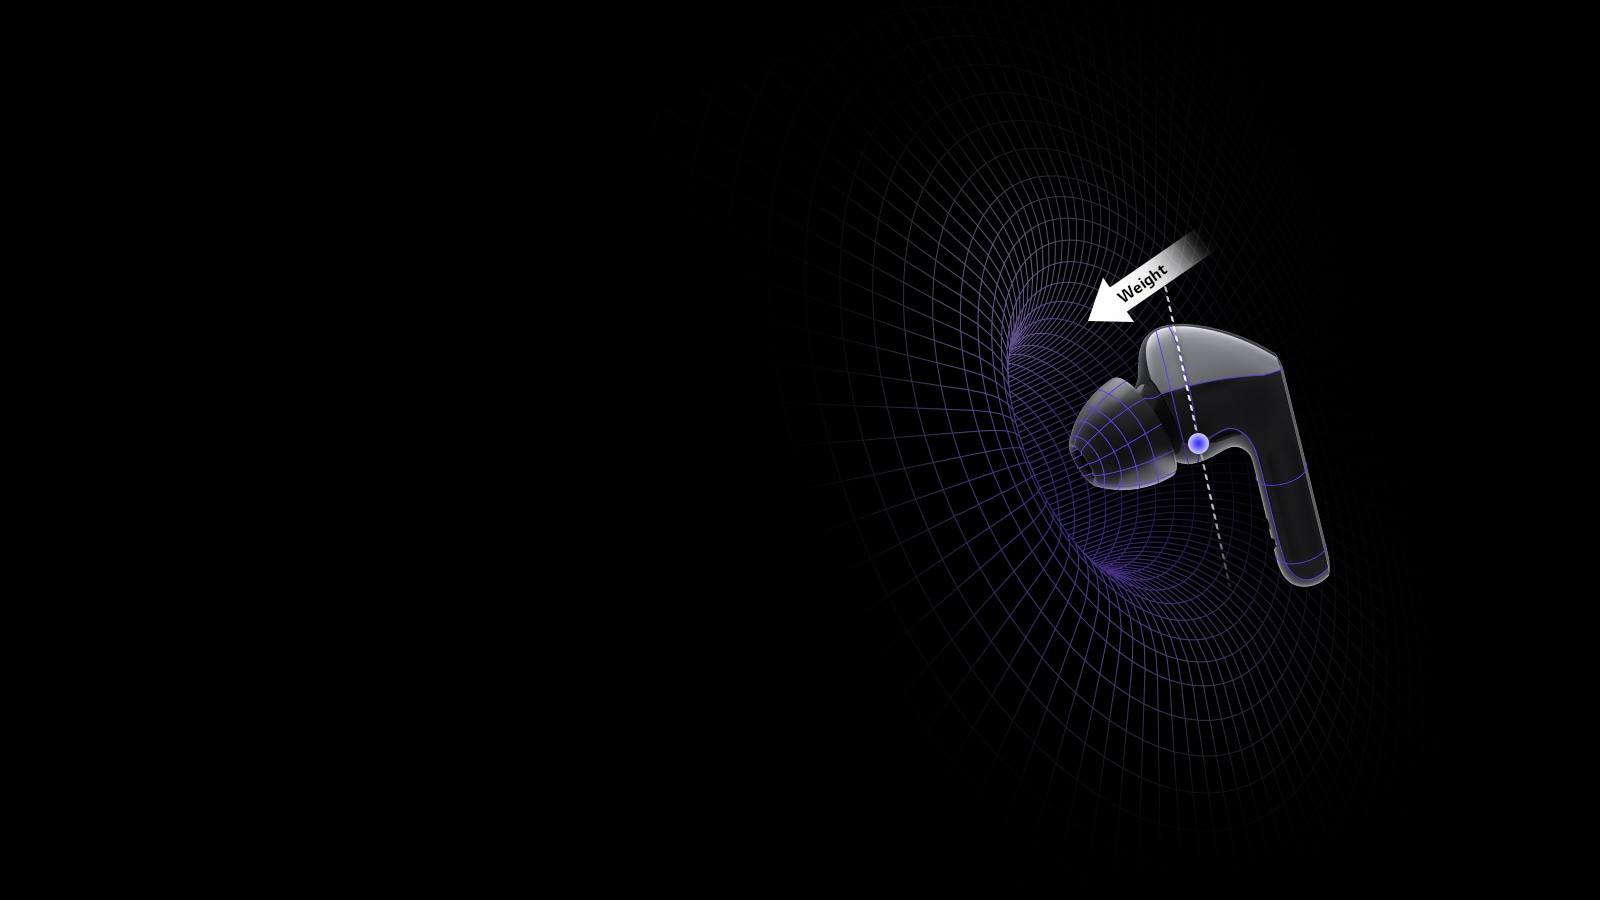 An image of an earbuds in a virtual space with diagrams showing that the weight is centered on the head of the earbud